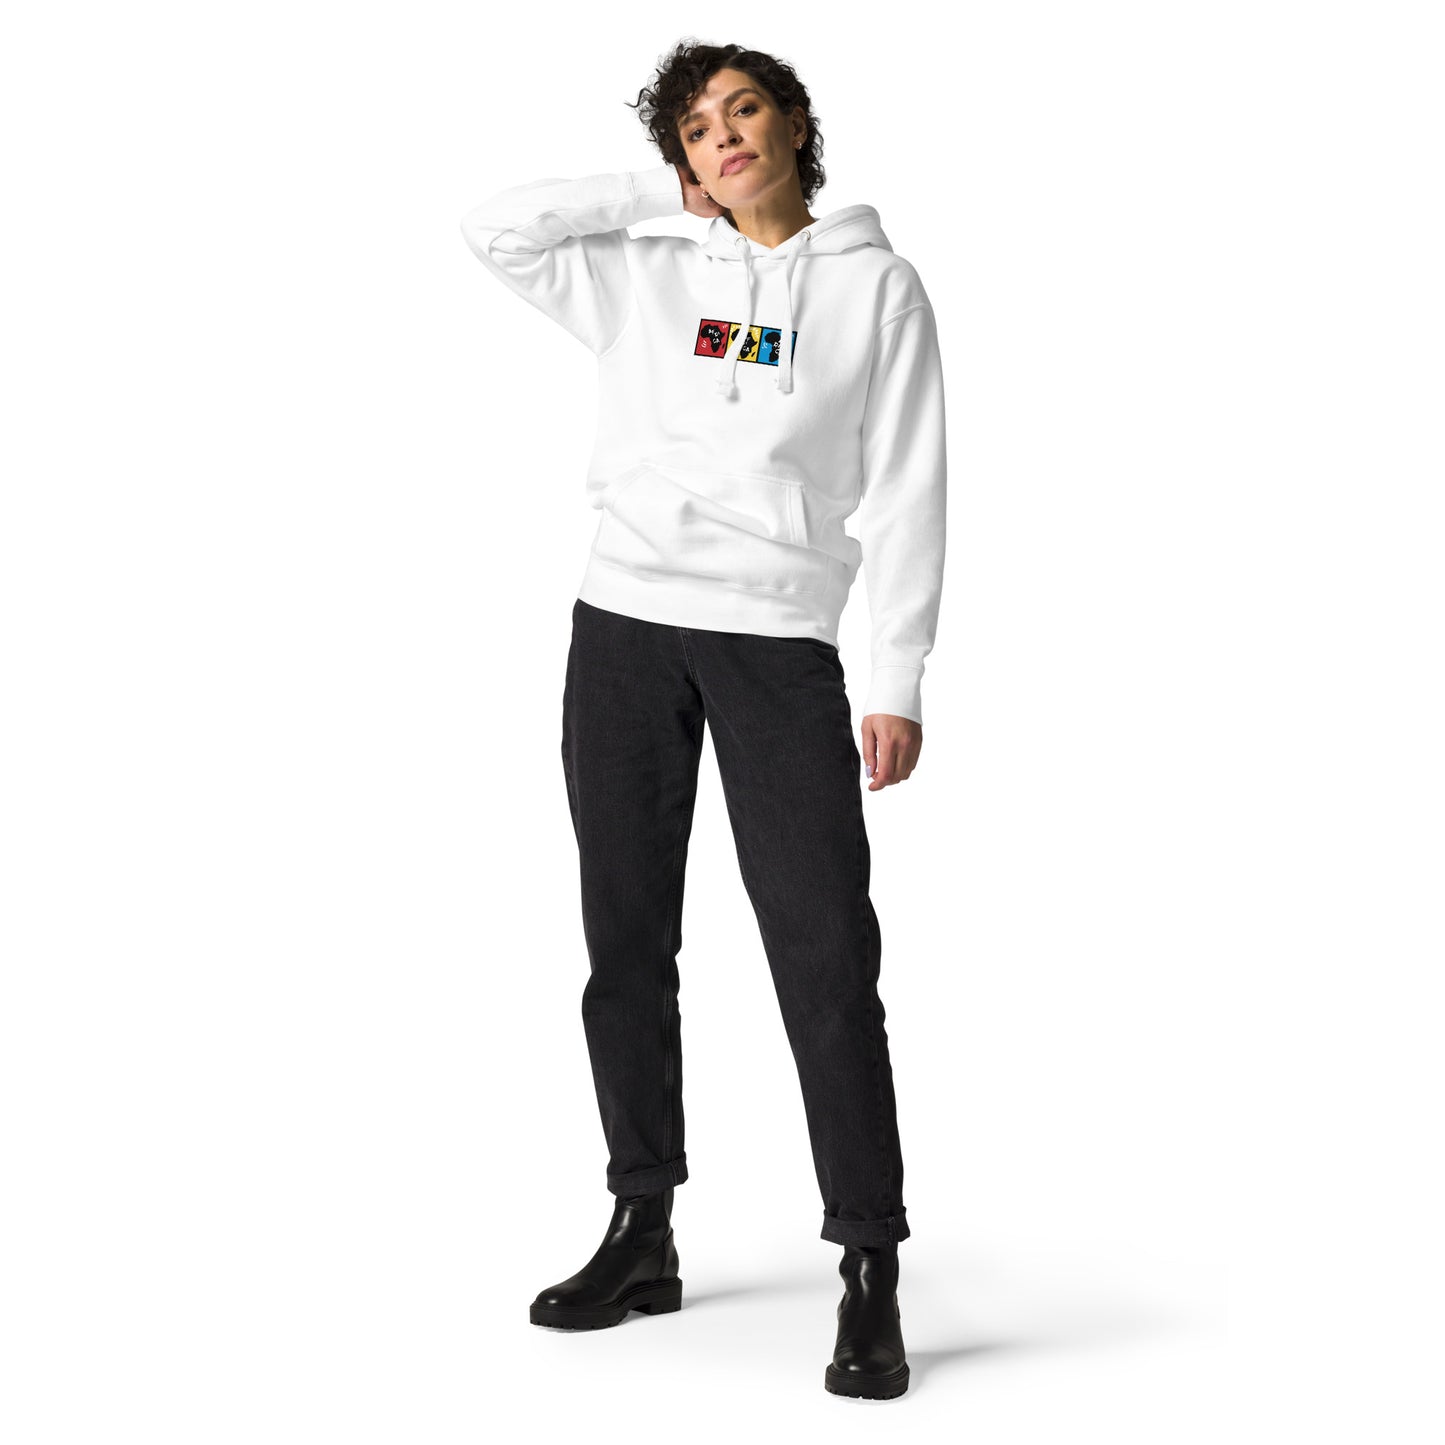 AFRICA PRIMARY Hoodie (White)